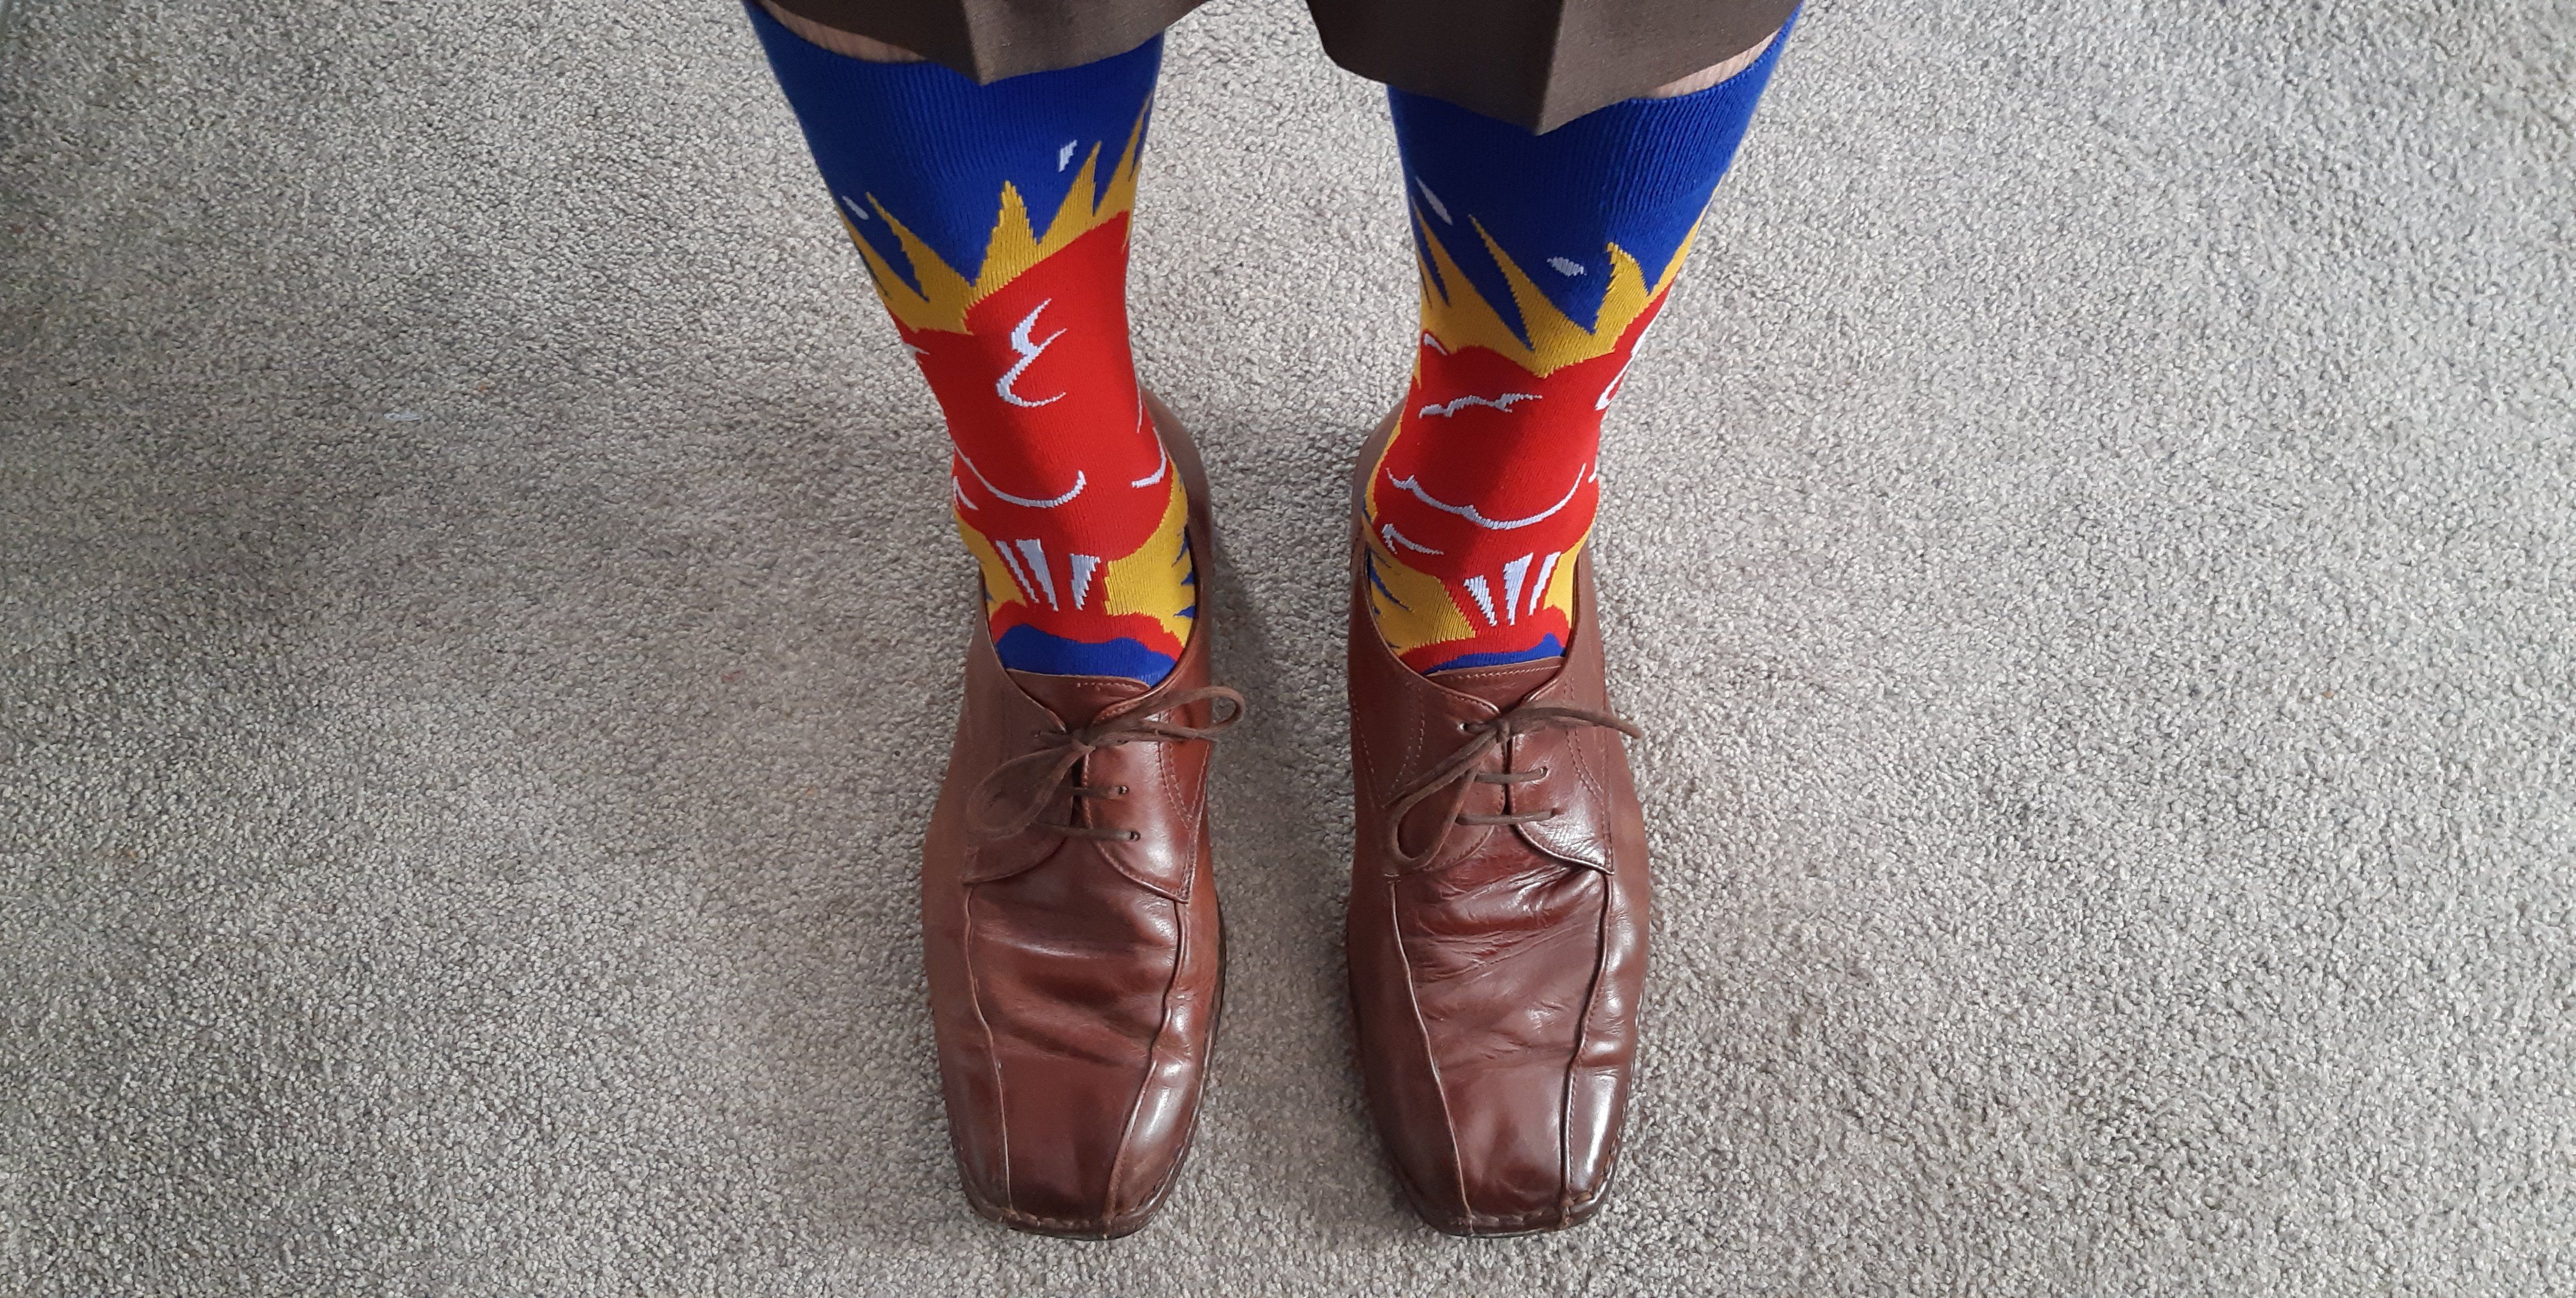 Why doctors are wearing crazy socks to raise awareness for mental illness